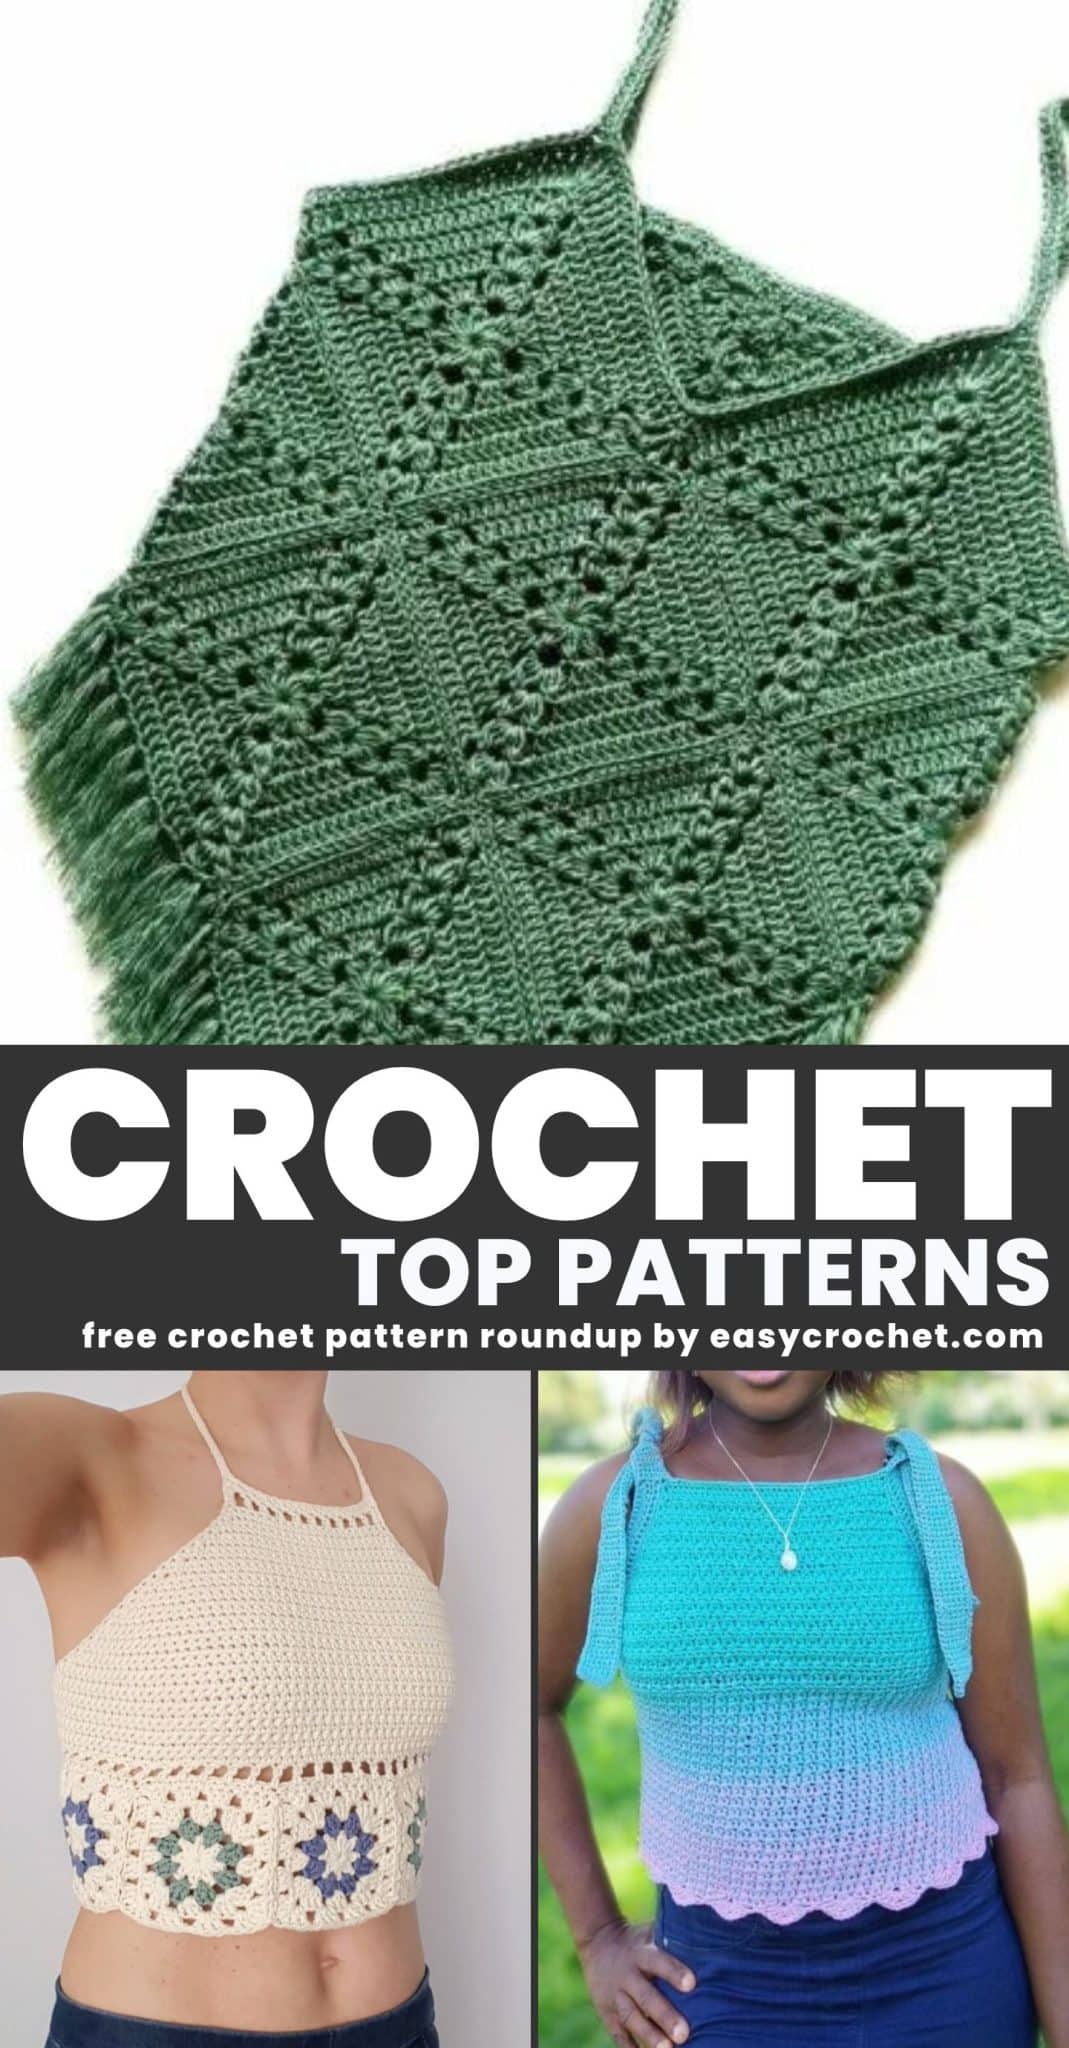 36 Free Crochet Top Patterns for Summer - Easy Crochet Patterns  Crochet  halter top pattern, Crochet tops free patterns, Crochet ladies tops